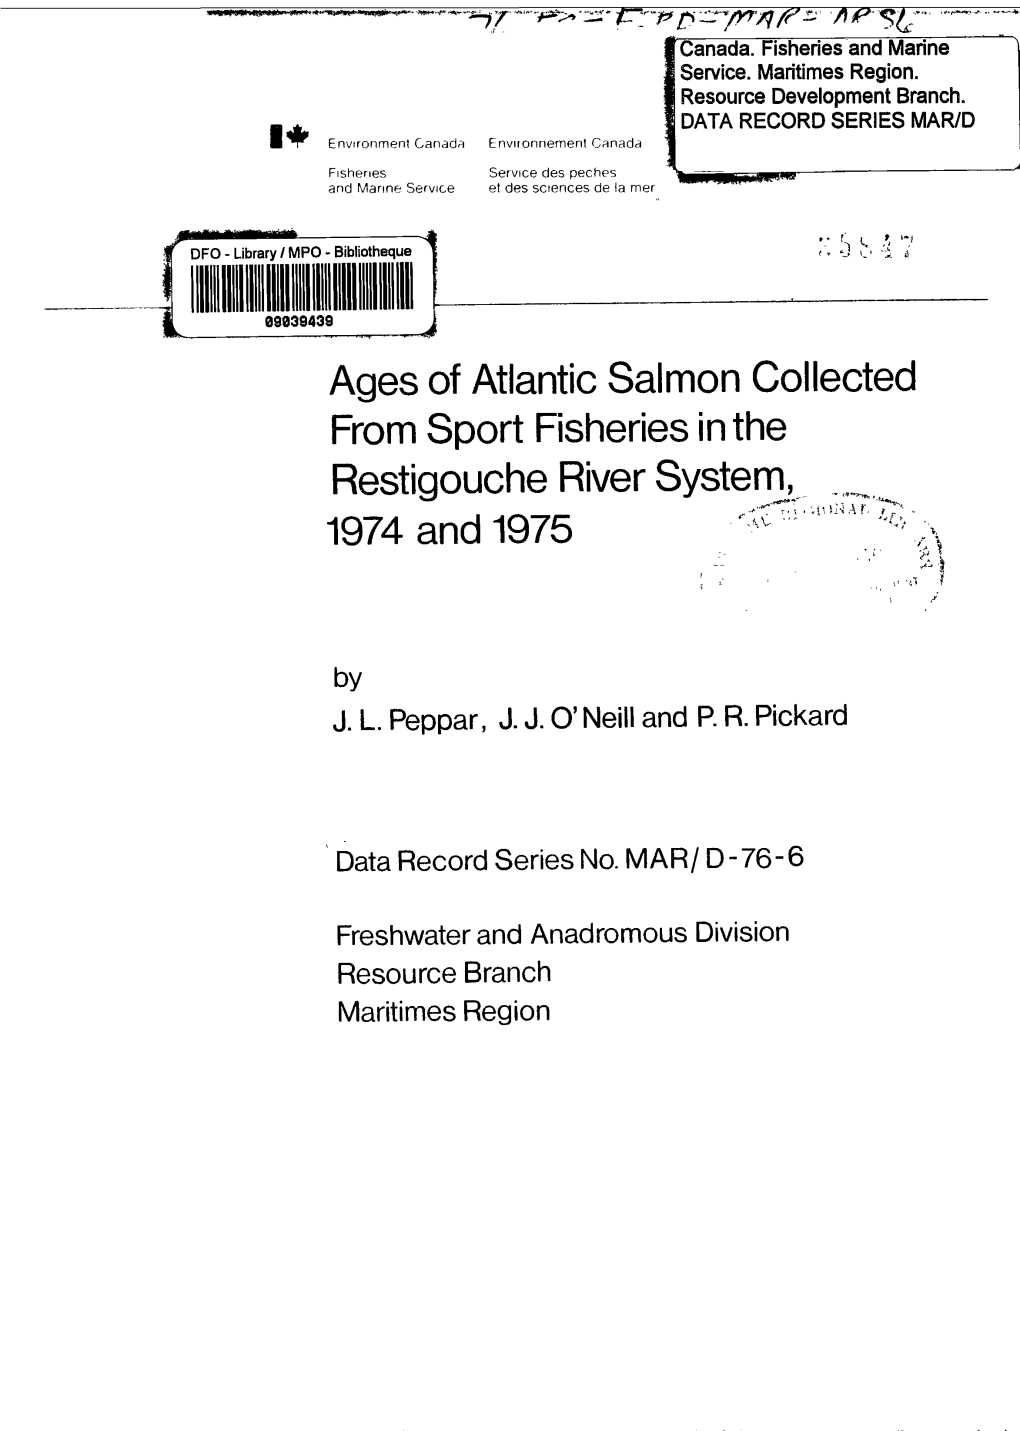 Restigouche River System 1974 and 1975 Ages of Atlantic Salmon